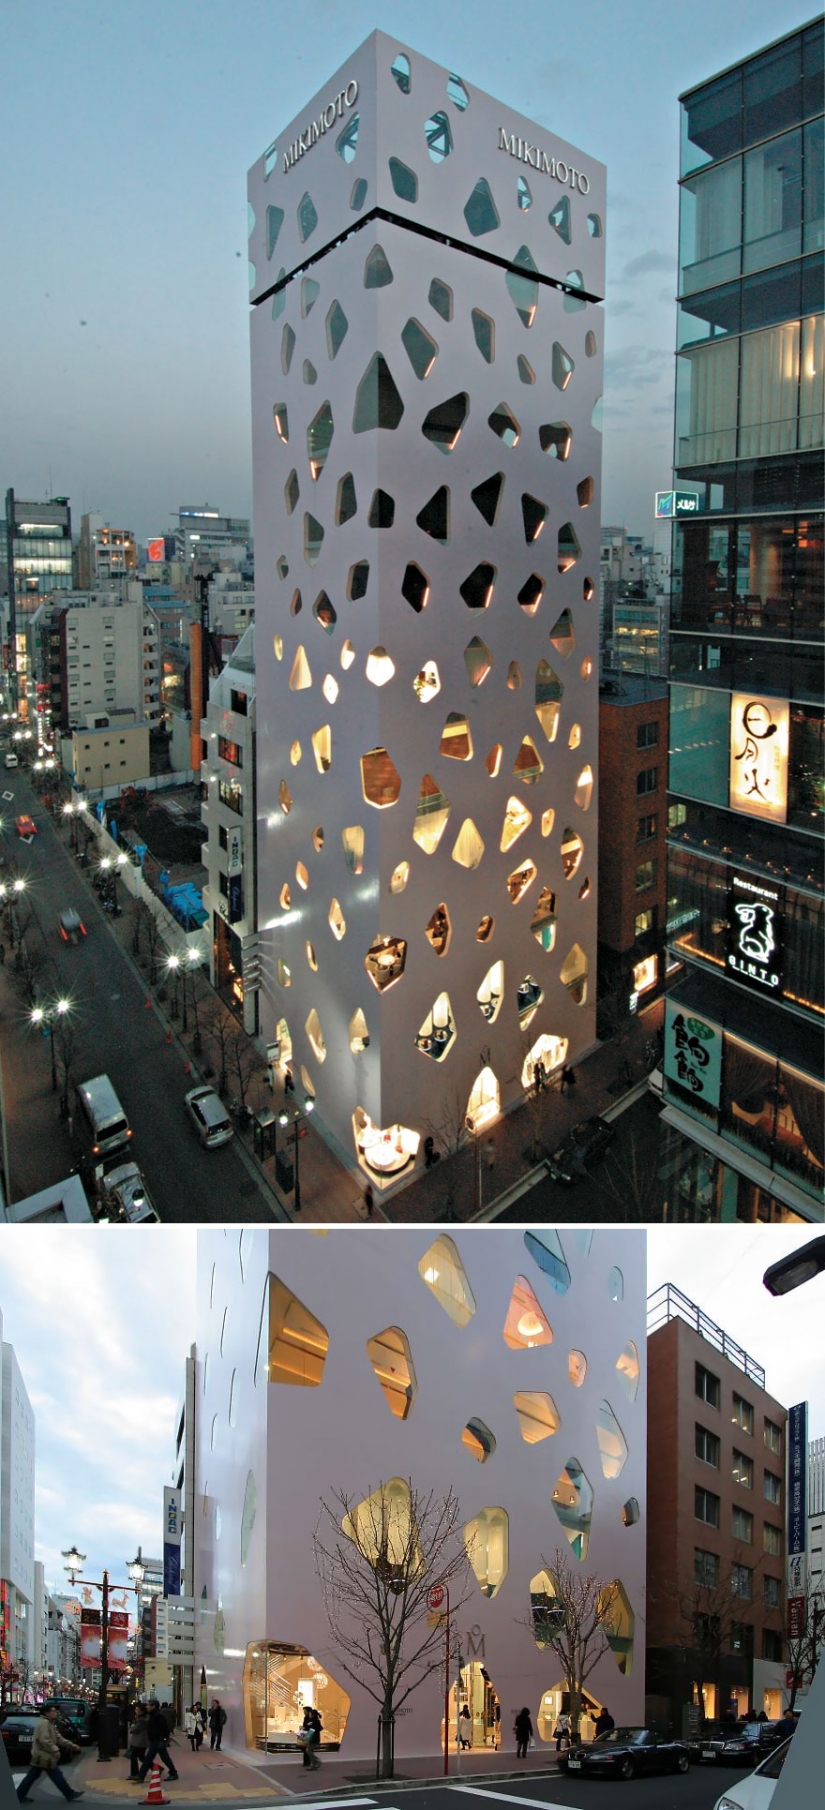 Japanese perversion in architecture